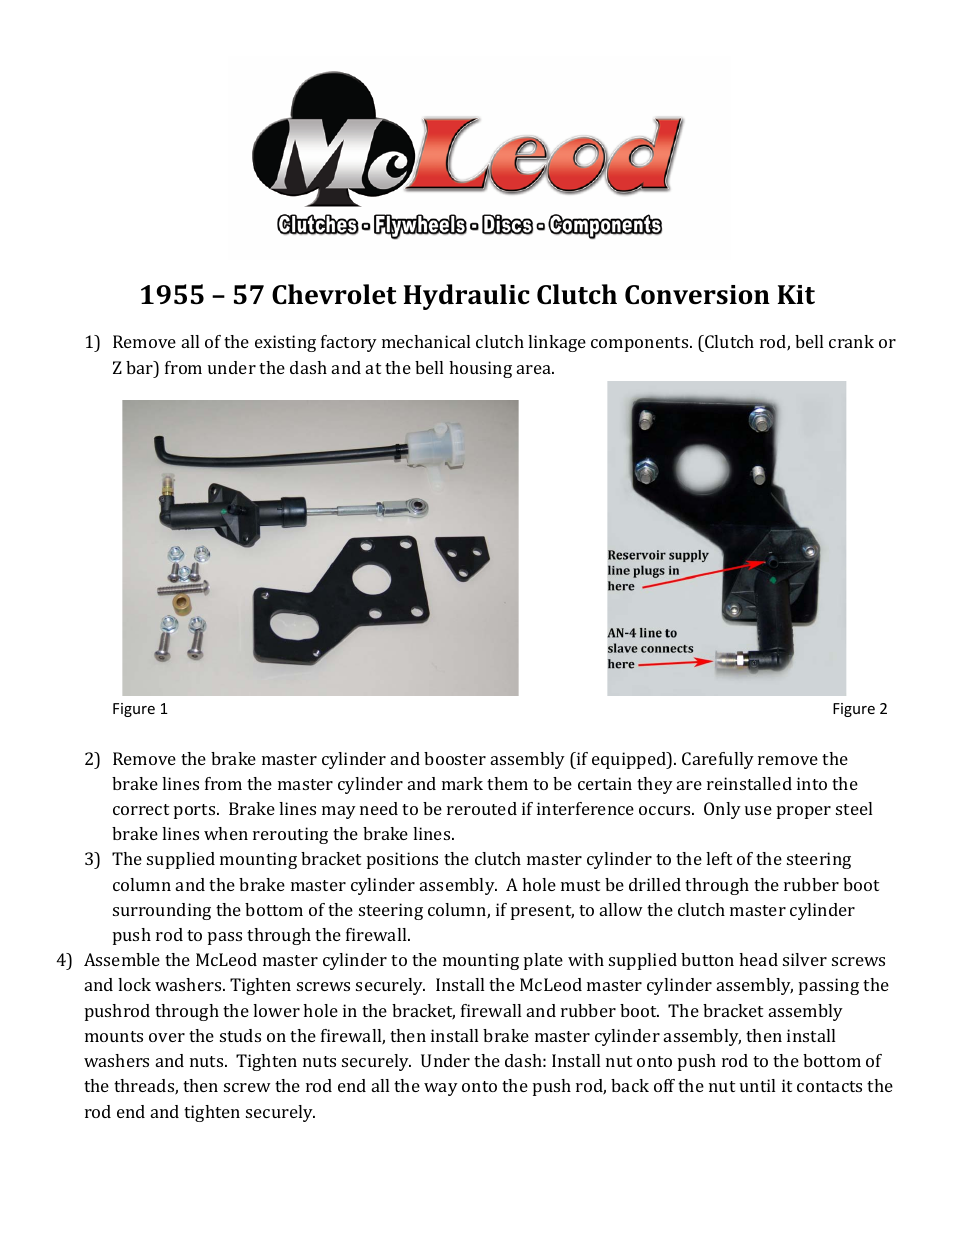 1955-57 Chevy Hydraulic Conversion Instructions